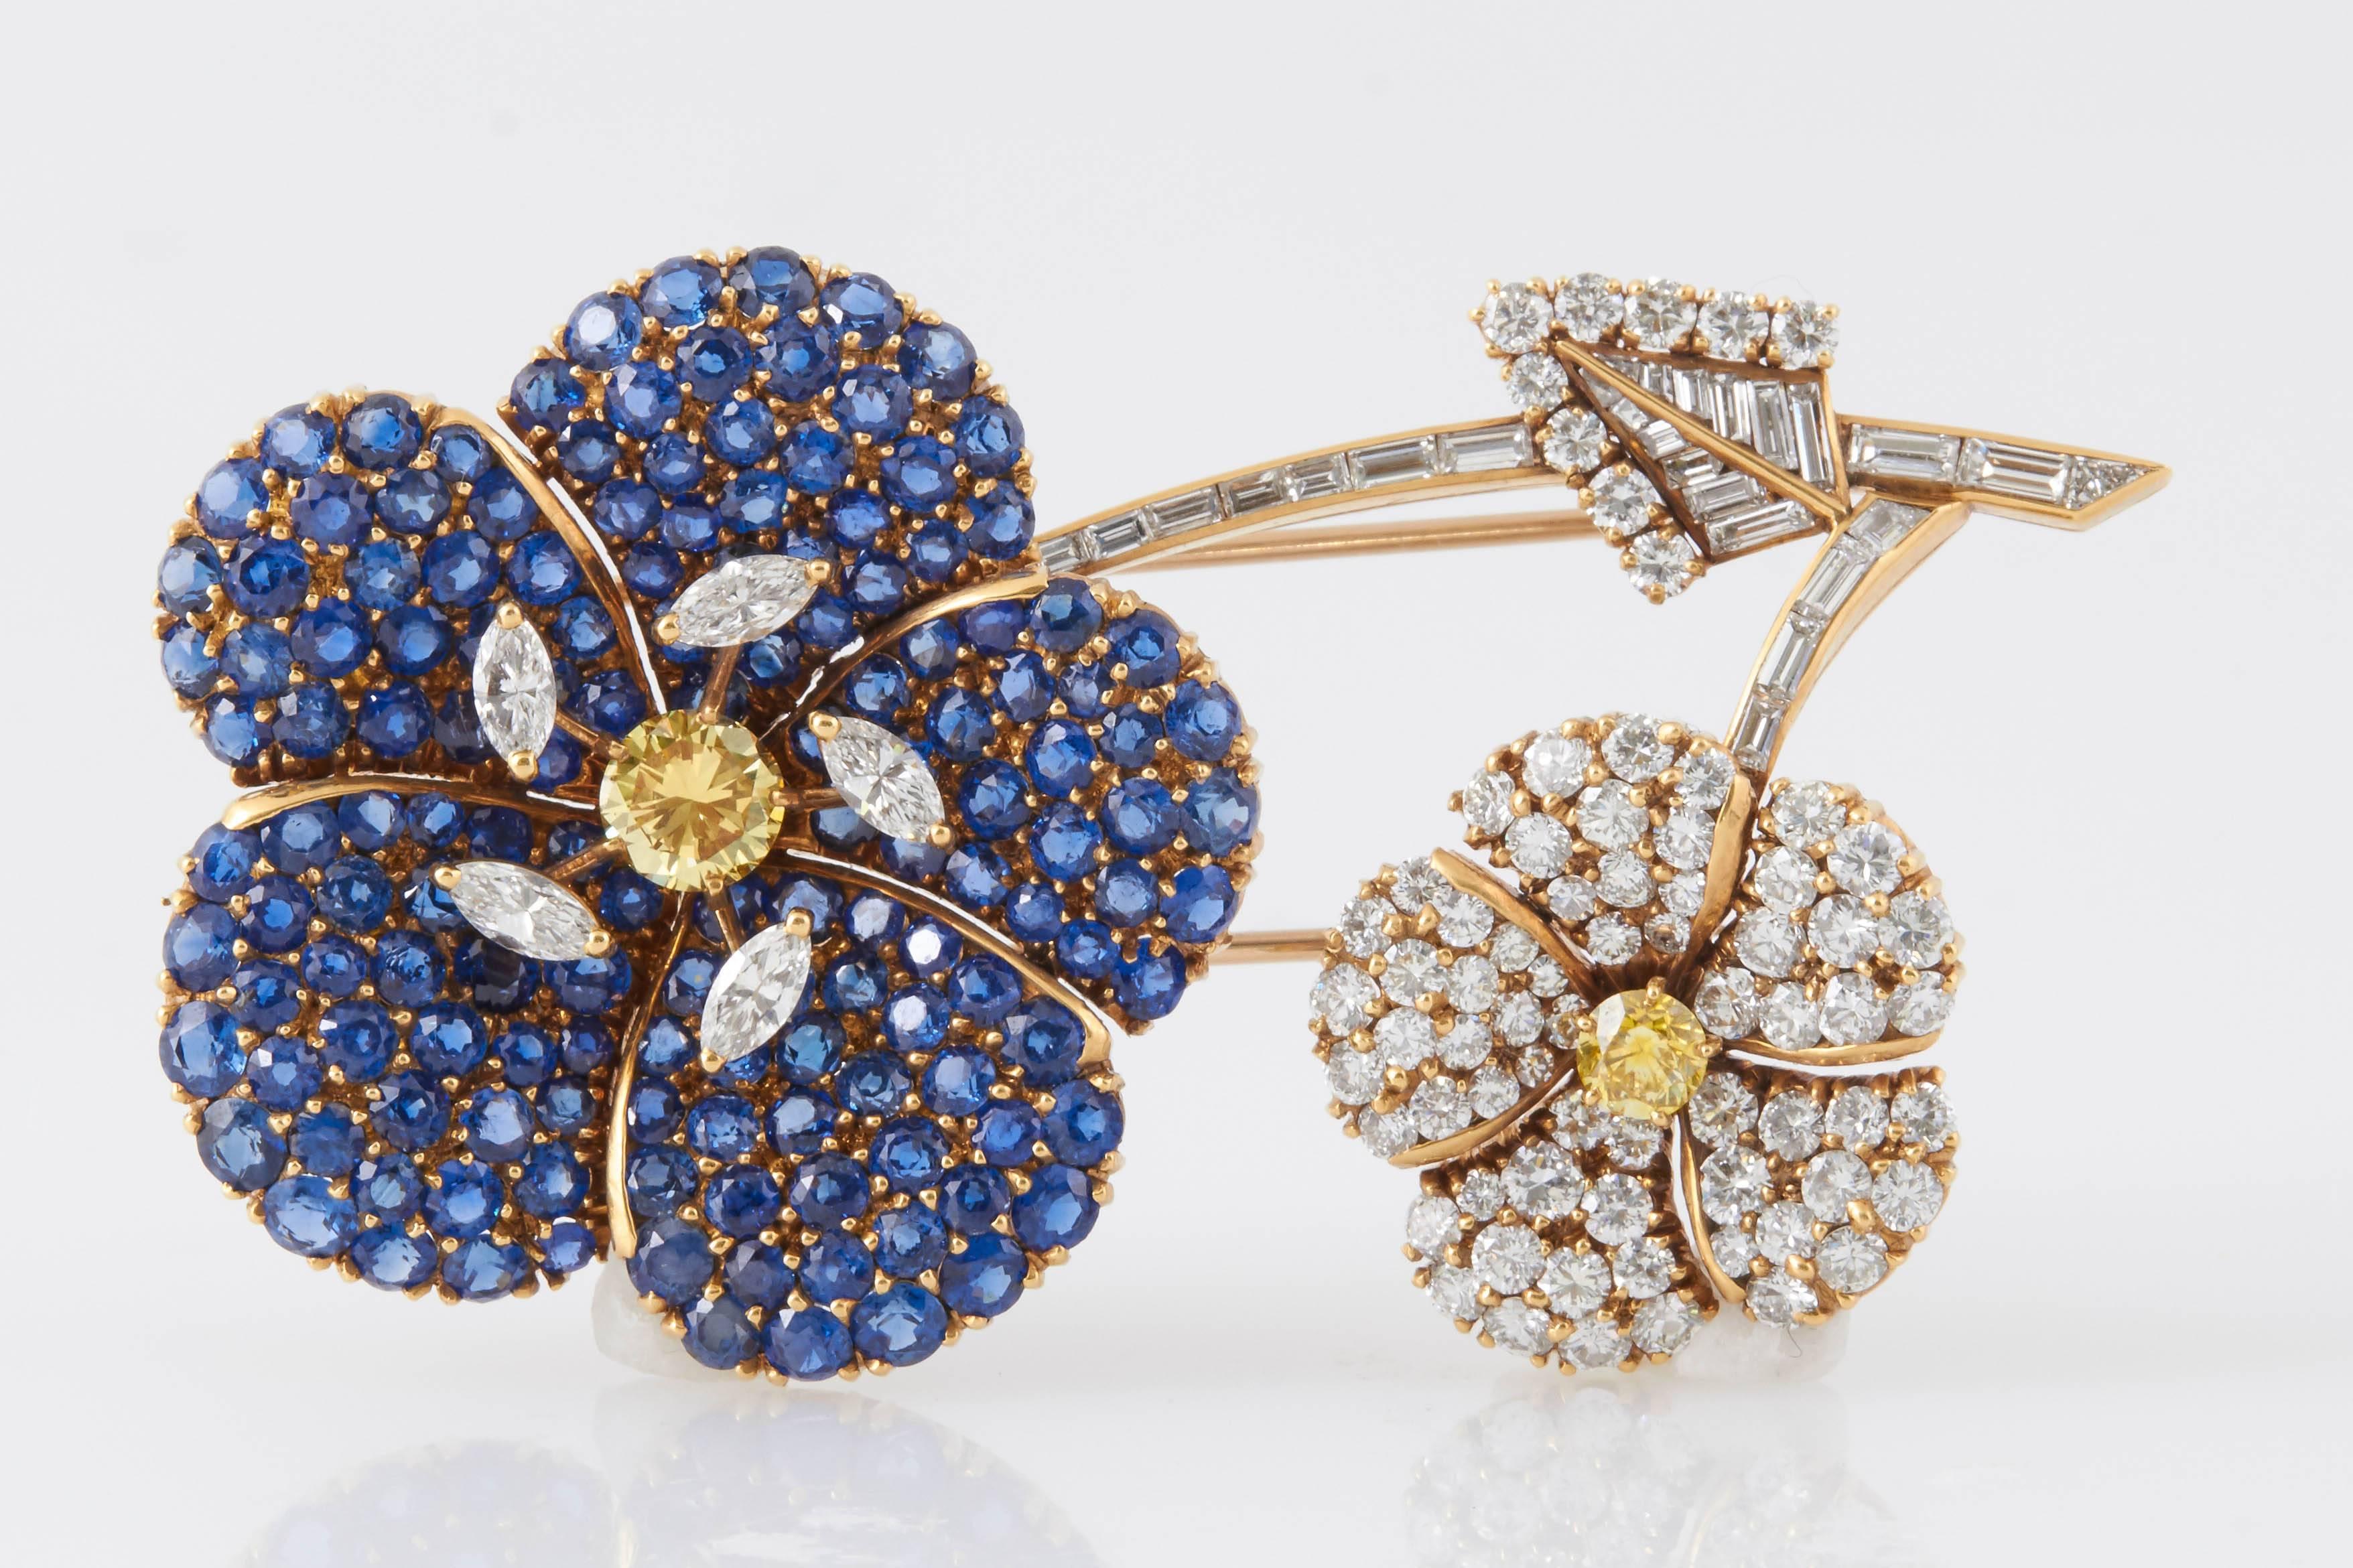 Signed Cartier Flower Brooch finely crafted in 18K yellow gold, accented with sapphires, natural fancy yellow diamonds, round and baguette cut diamonds. 